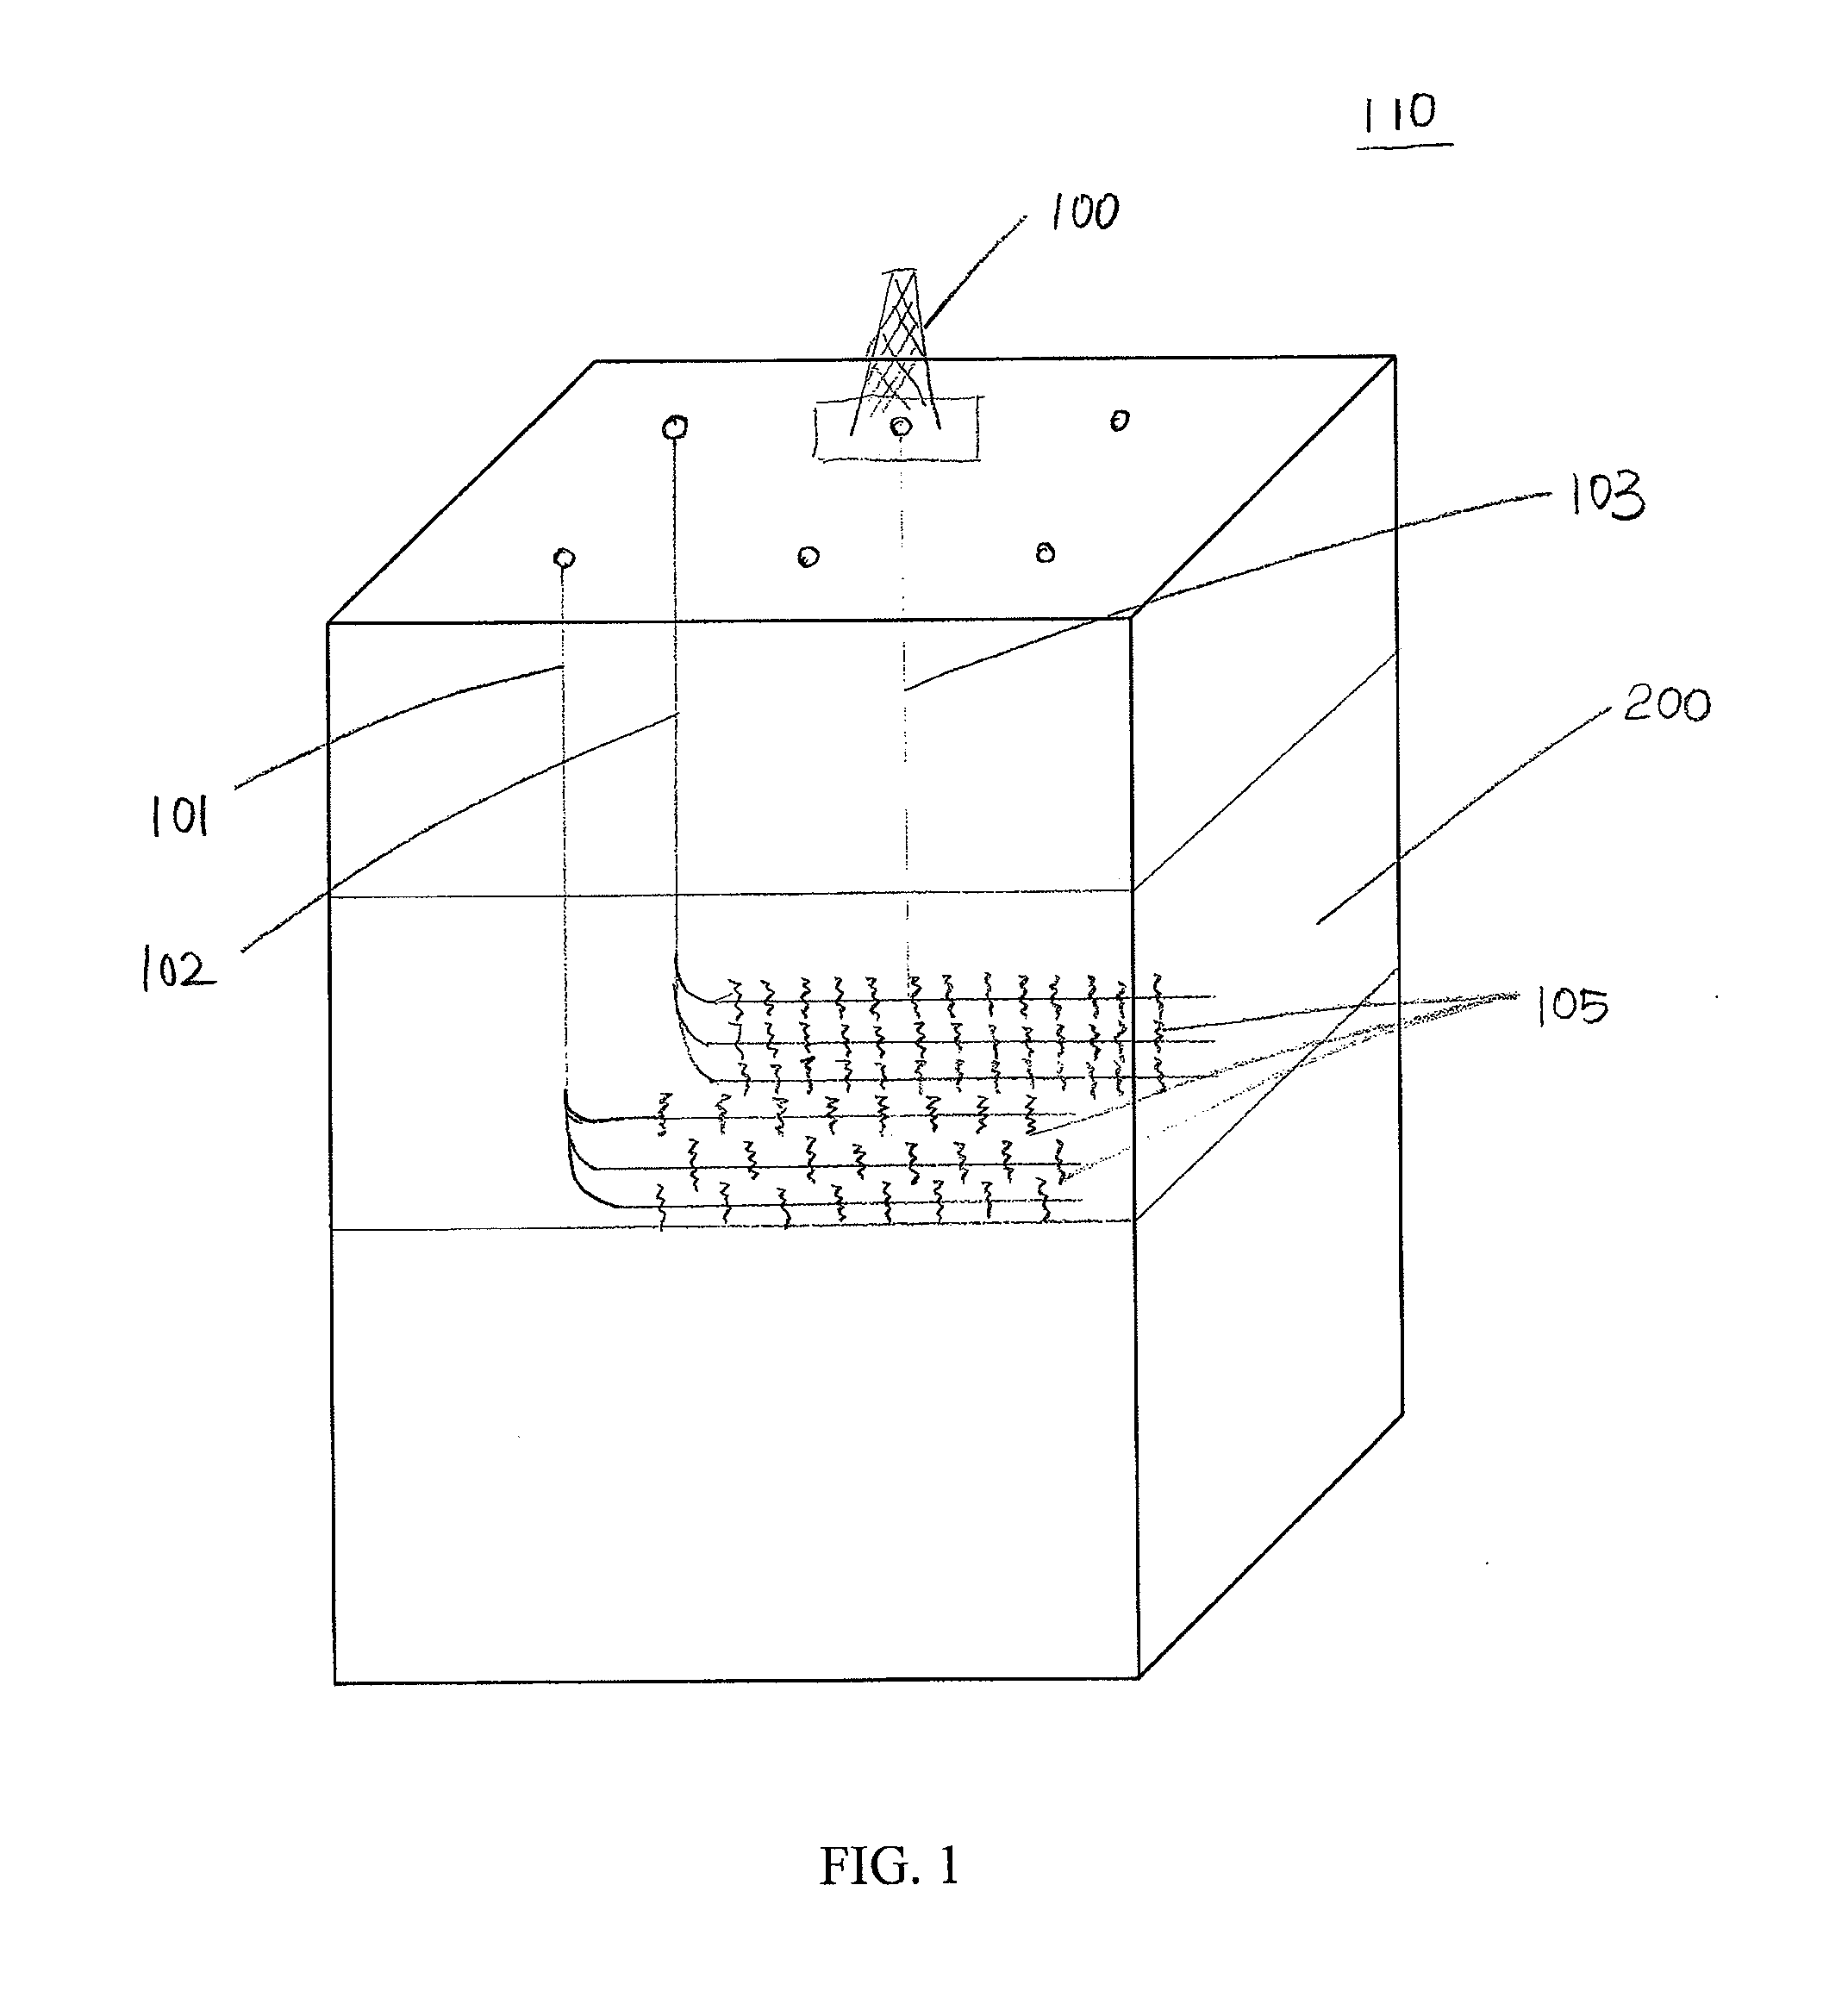 Method of acquiring information of hydraulic fracture geometry for evaluating and optimizing well spacing for multi-well pad